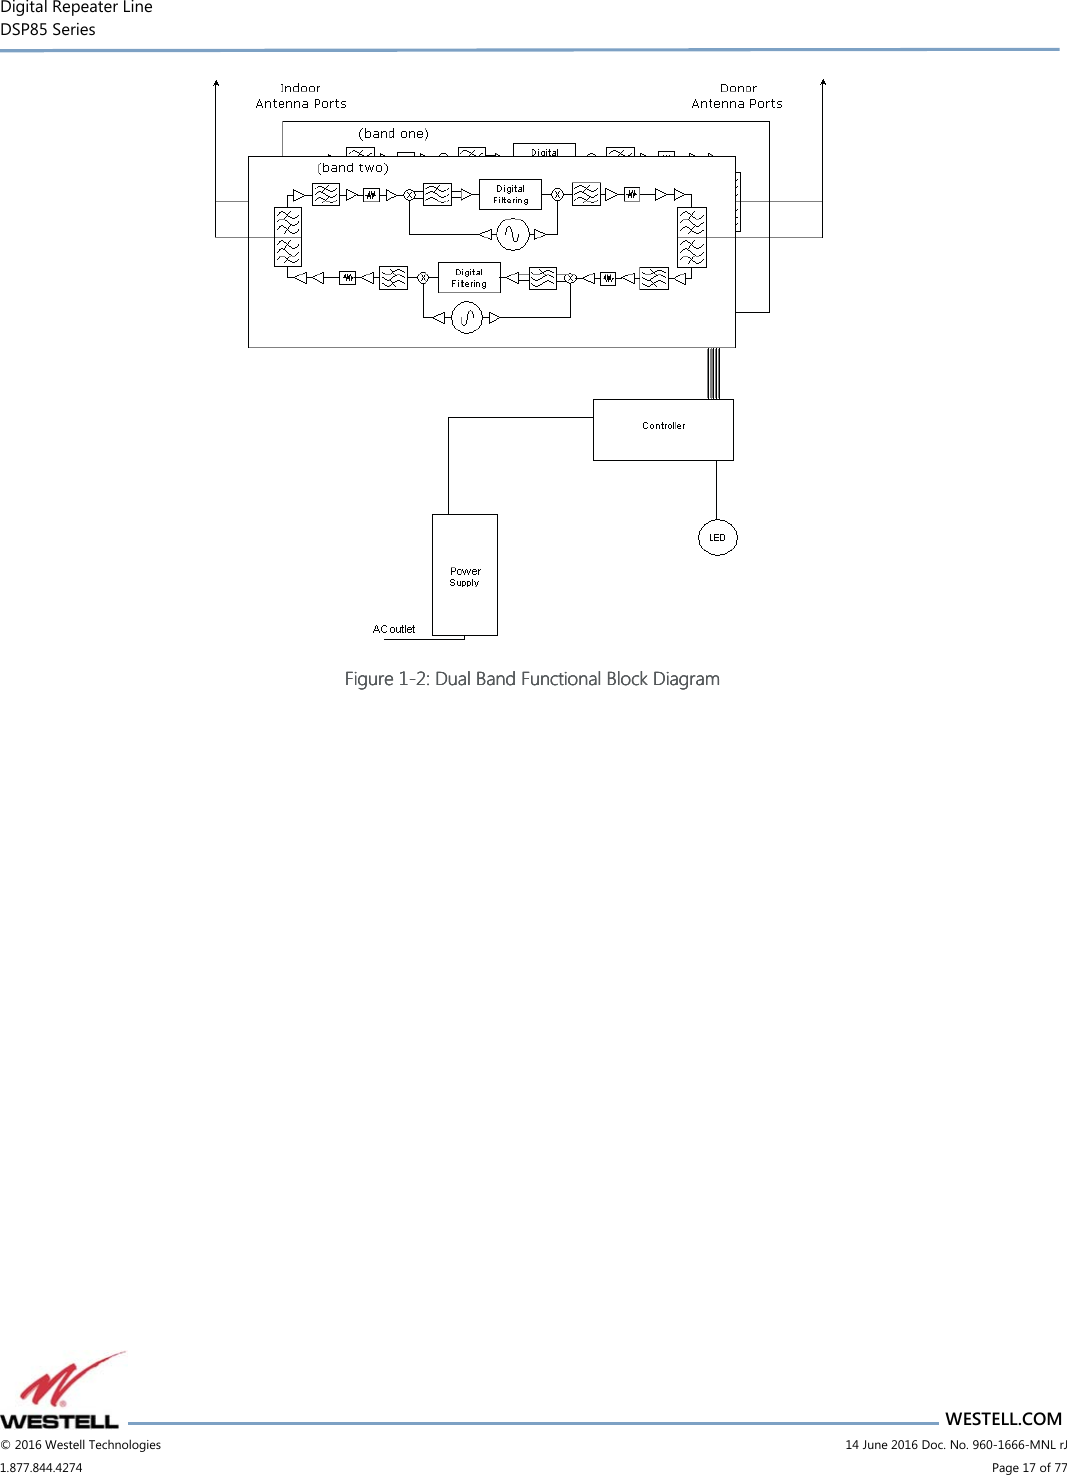 Digital Repeater Line DSP85 Series                       WESTELL.COM © 2016 Westell Technologies                         14 June 2016 Doc. No. 960-1666-MNL rJ 1.877.844.4274                             Page 17 of 77   Figure Figure Figure Figure 1111----2222: : : : Dual Band Functional Block DiagramDual Band Functional Block DiagramDual Band Functional Block DiagramDual Band Functional Block Diagram     